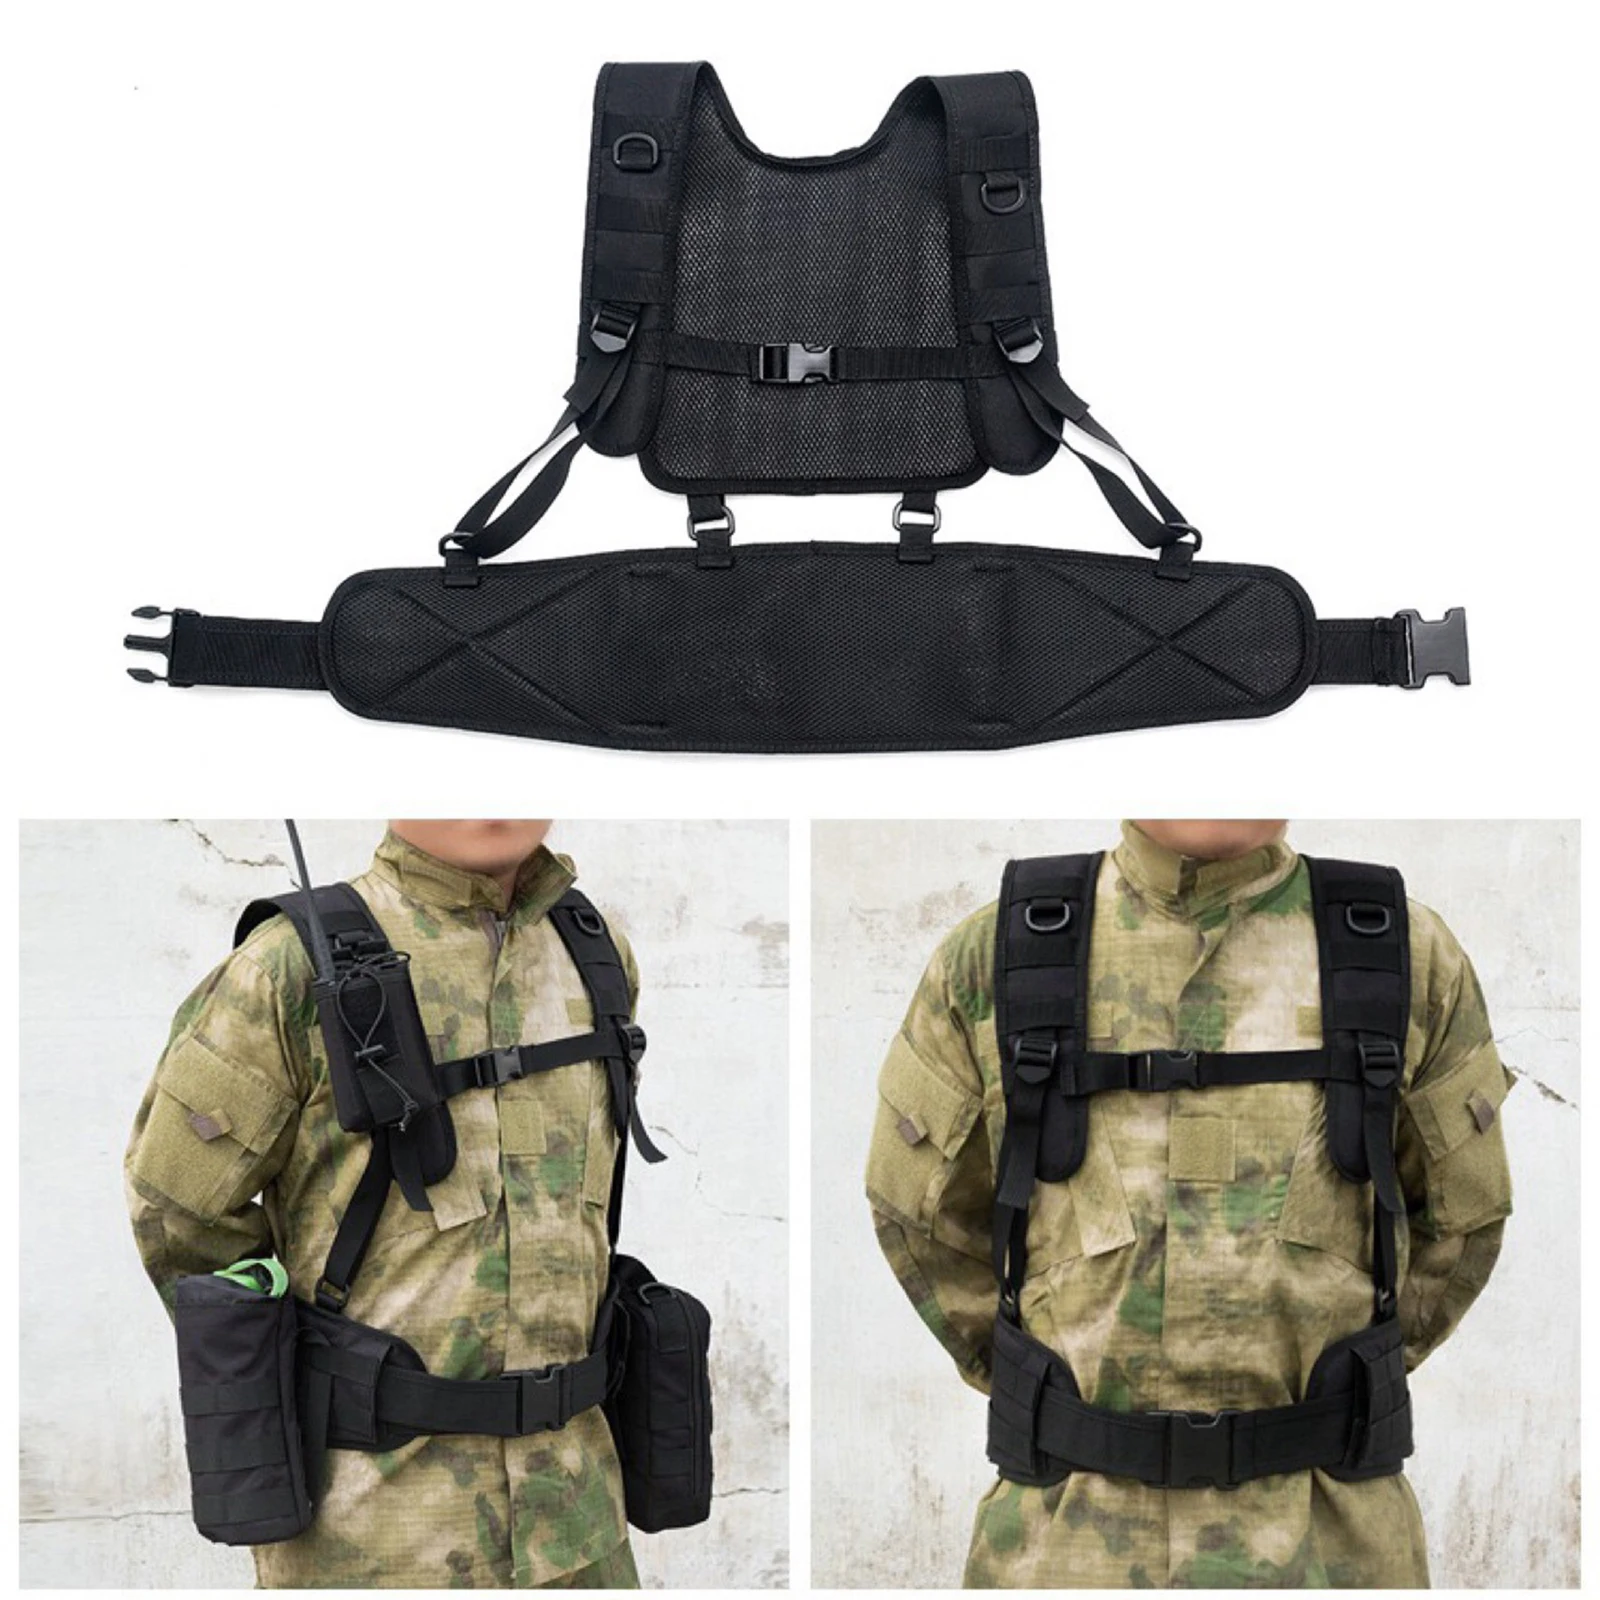  Vest Outdoor Ultralight Breathable Modular Vest for Special Mission Training Fields And Camping, Hunting, Fishing, Hiking